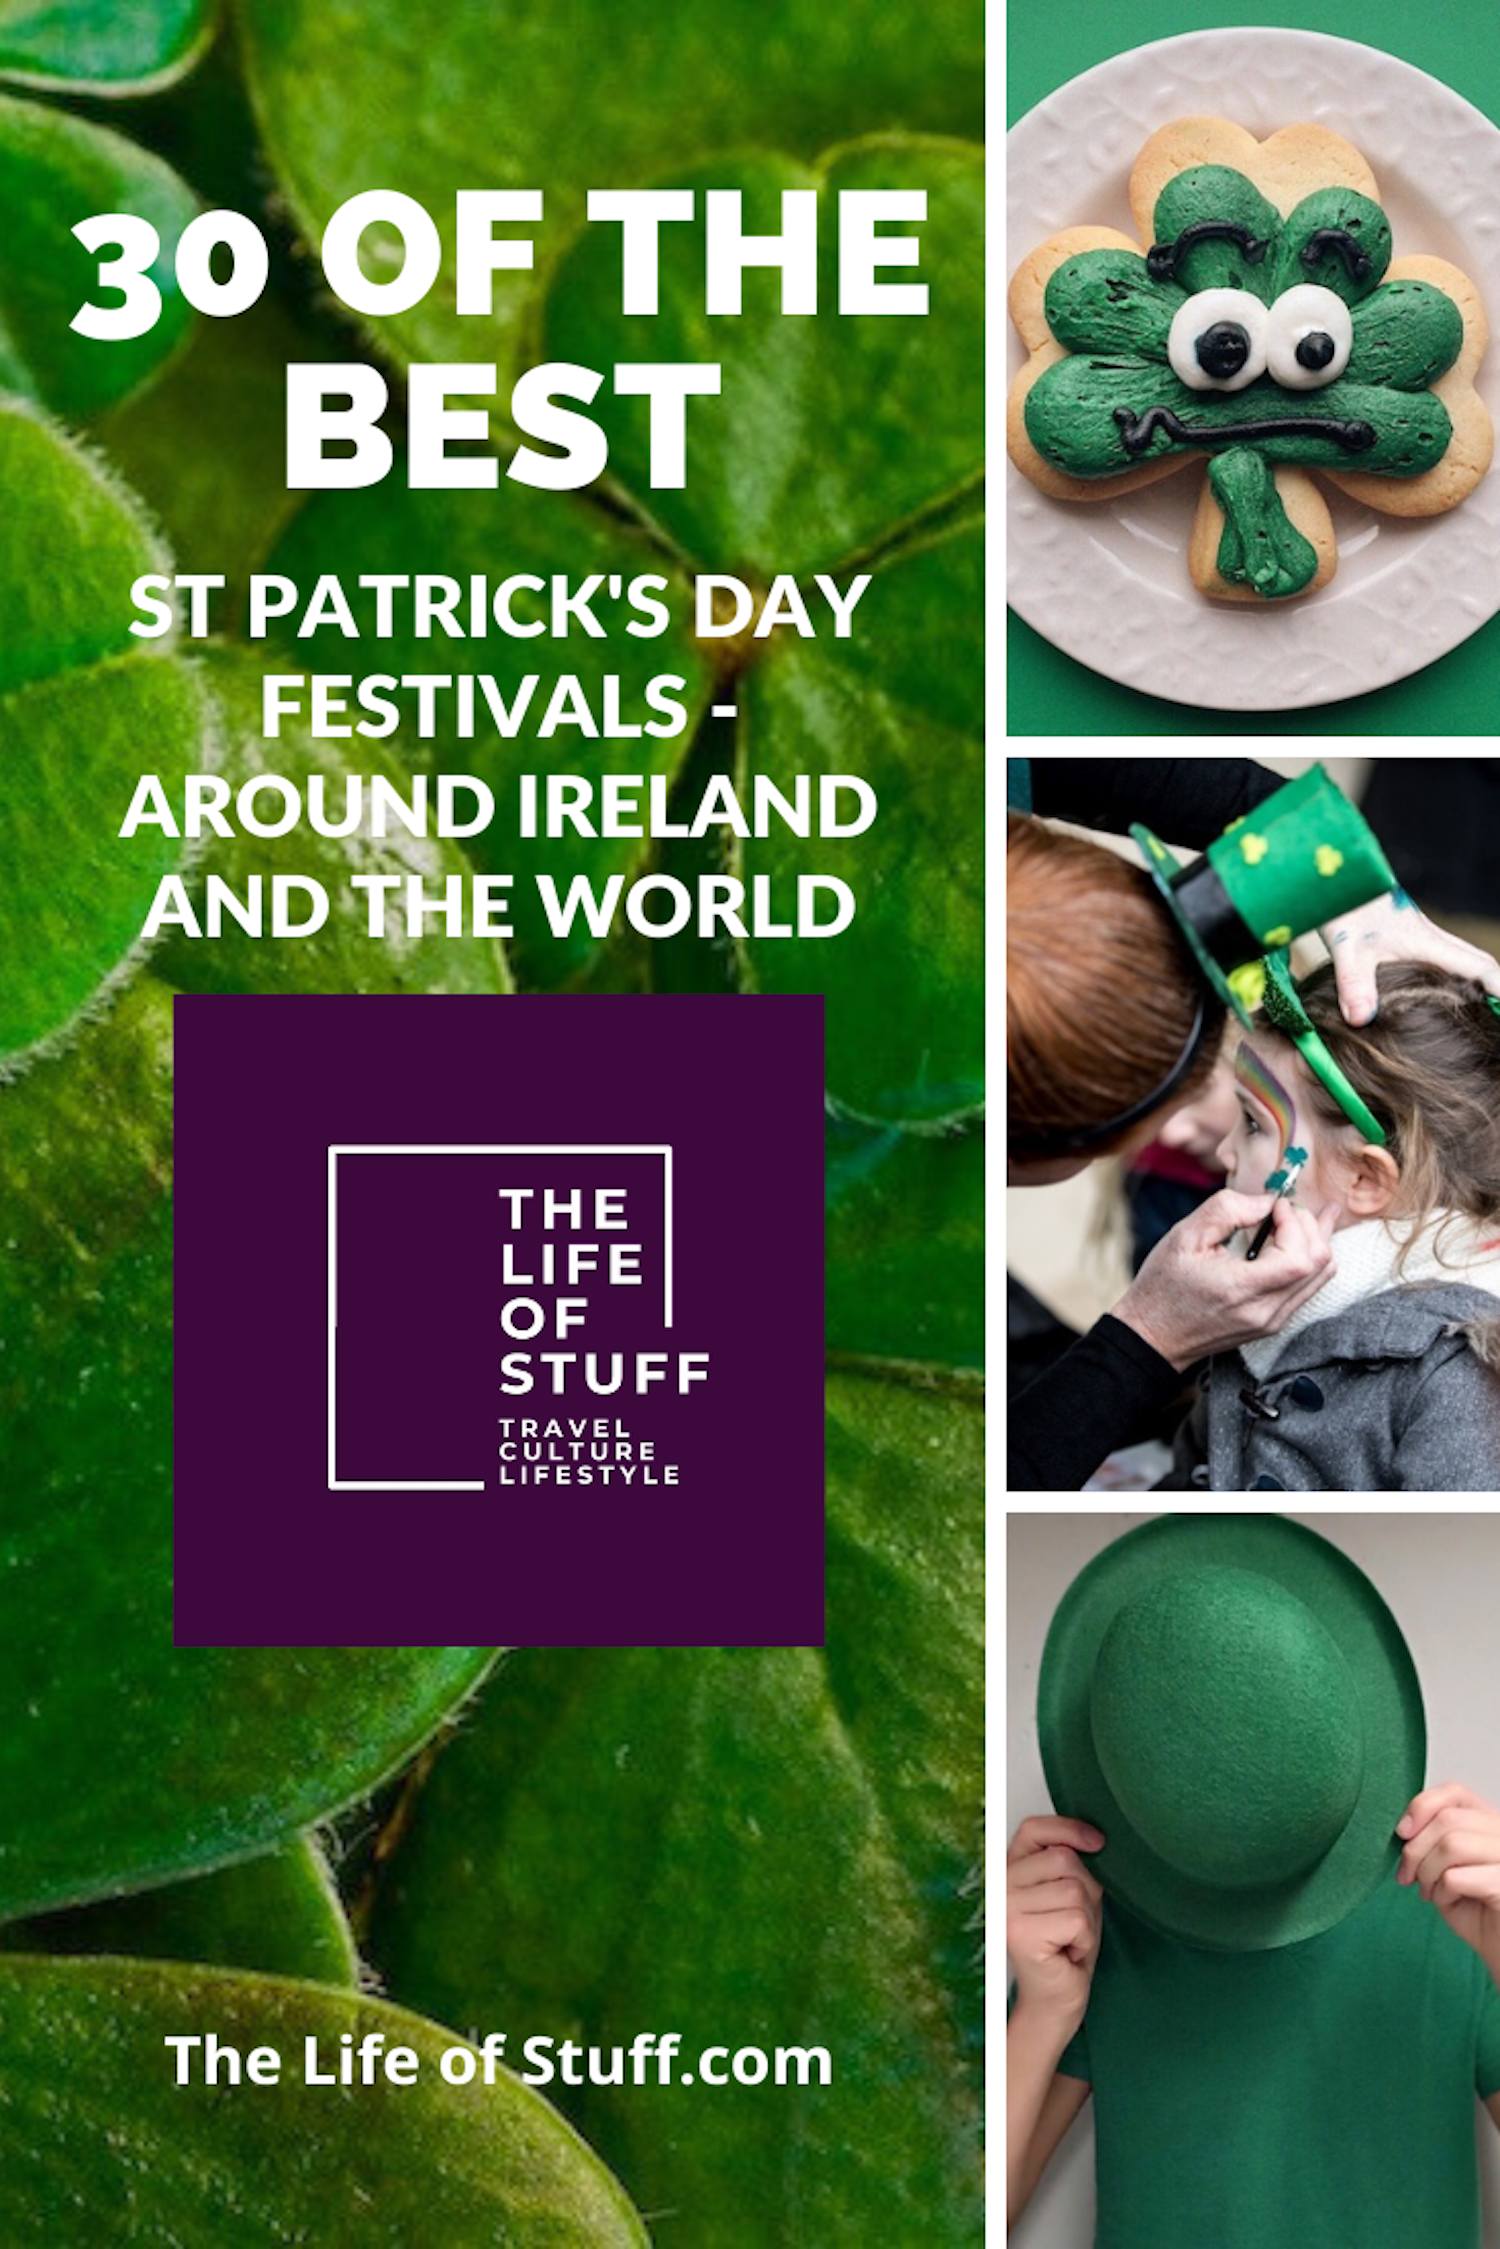 30 of the Best St Patrick's Day Festivals Around Ireland and the World